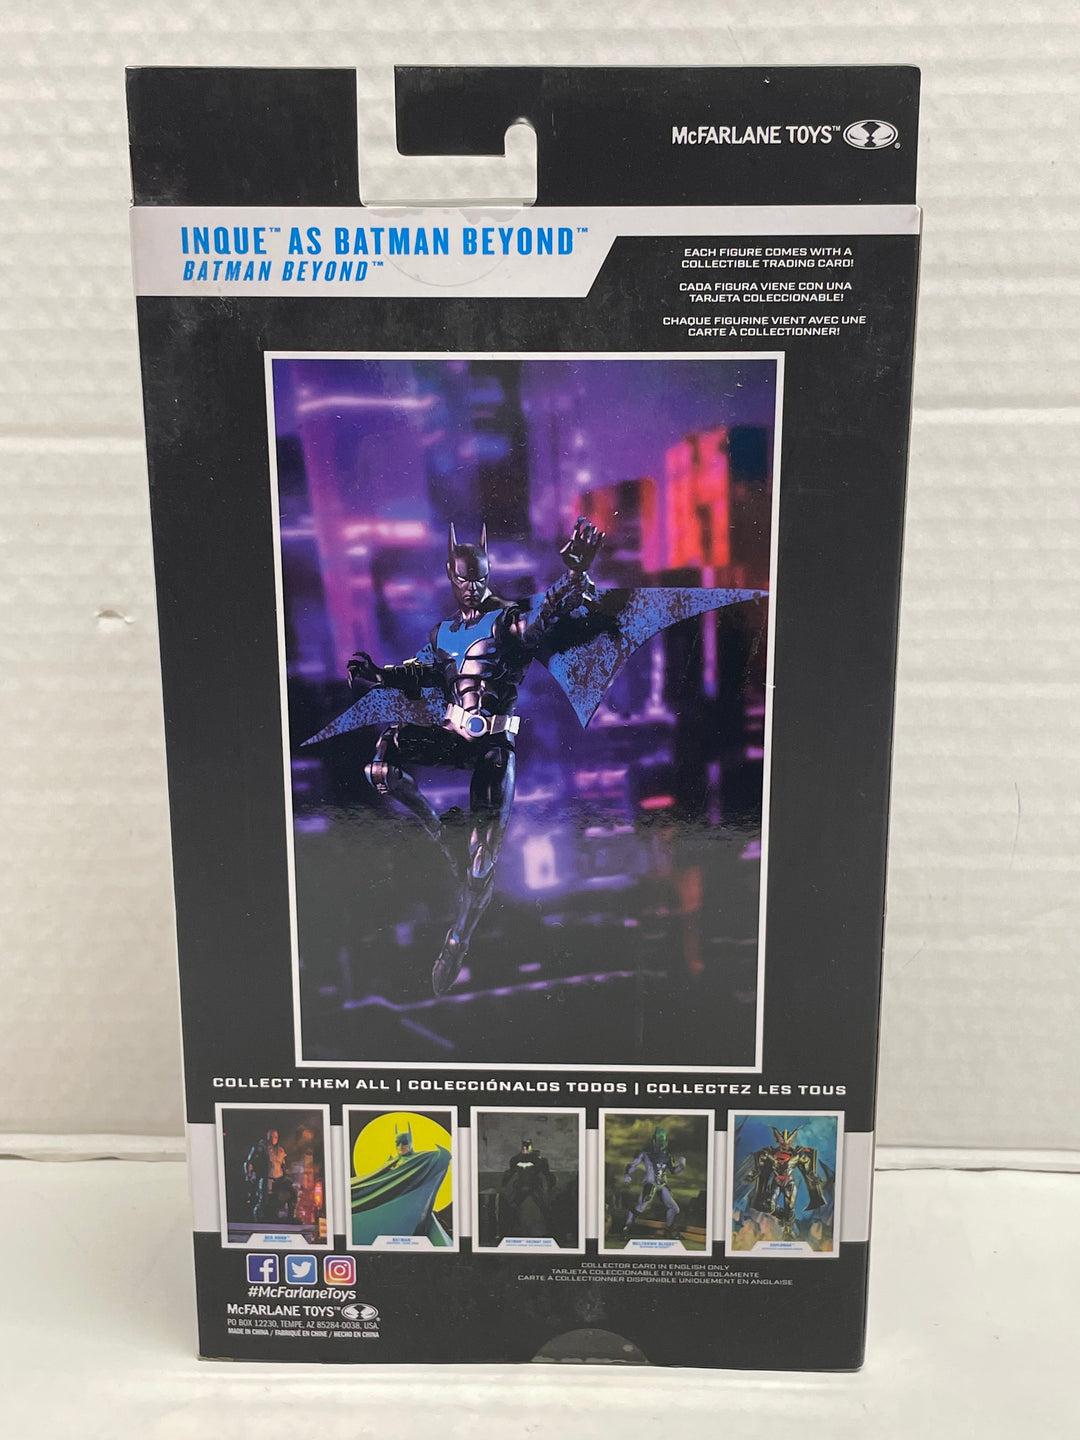 DC Multiverse Inque as Batman Beyond 7" Jointed Action Figure w/ 22 Moving Parts & Collector Card McFarlane Toys